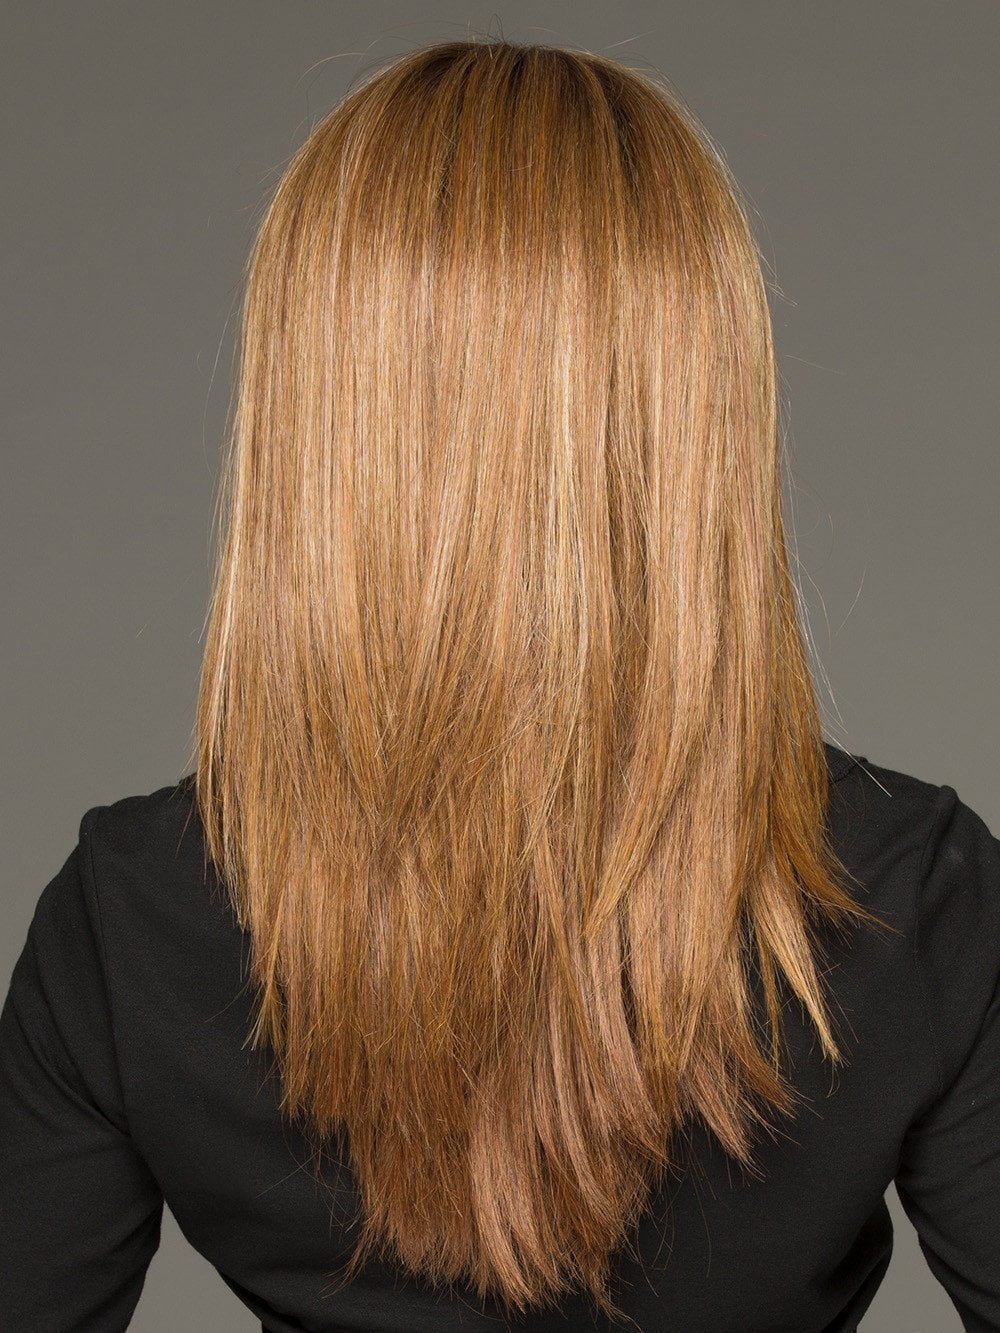 GOLDEN NUTMEG | Medium Brown roots with overall Warm Cinnamon base and Golden Blonde highlights (This piece has been styled and straightened)